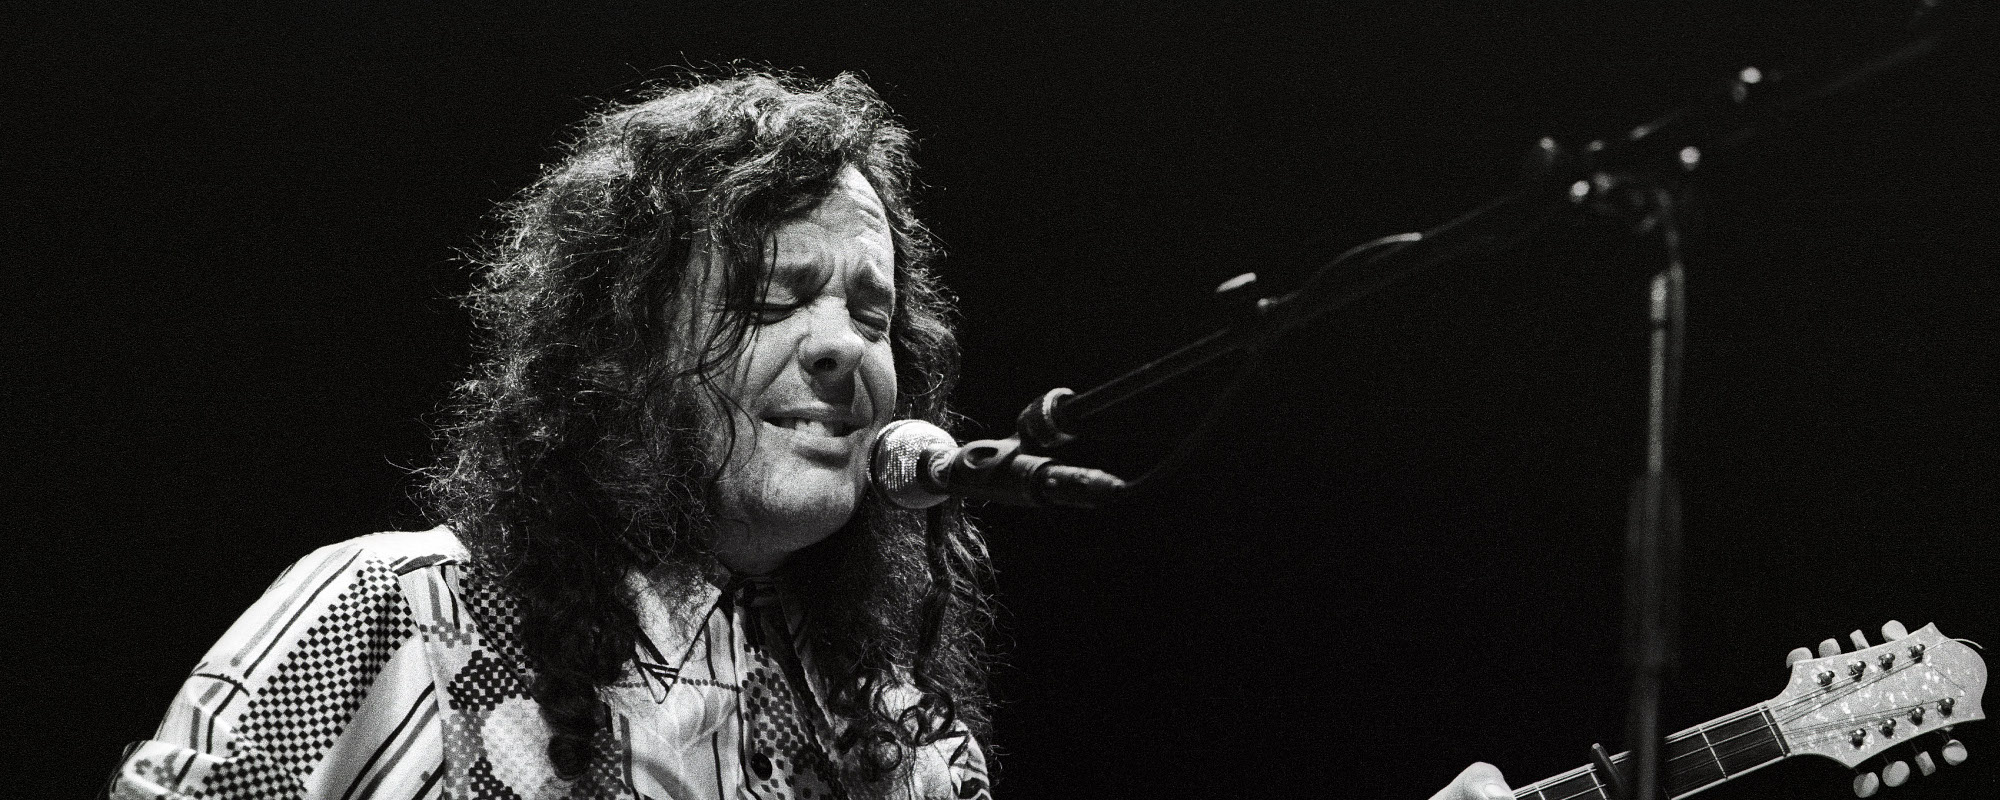 Peter Frampton, Stephen King & More React to David Lindley’s Passing: “The Man Was a Giant”